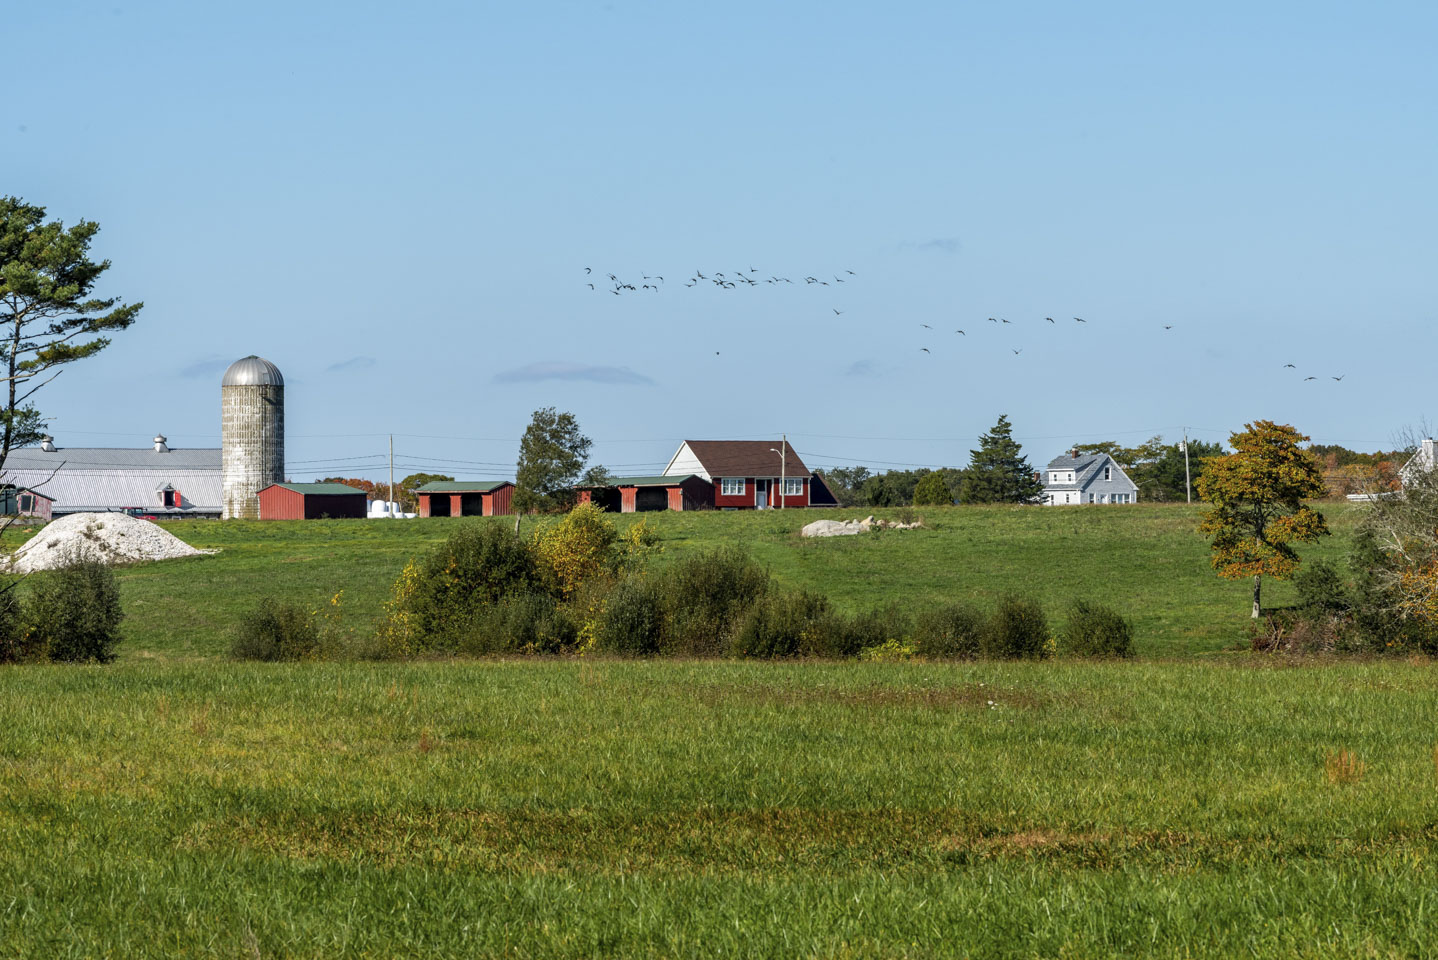 View of farm buildings and fields with birds flying in the sky